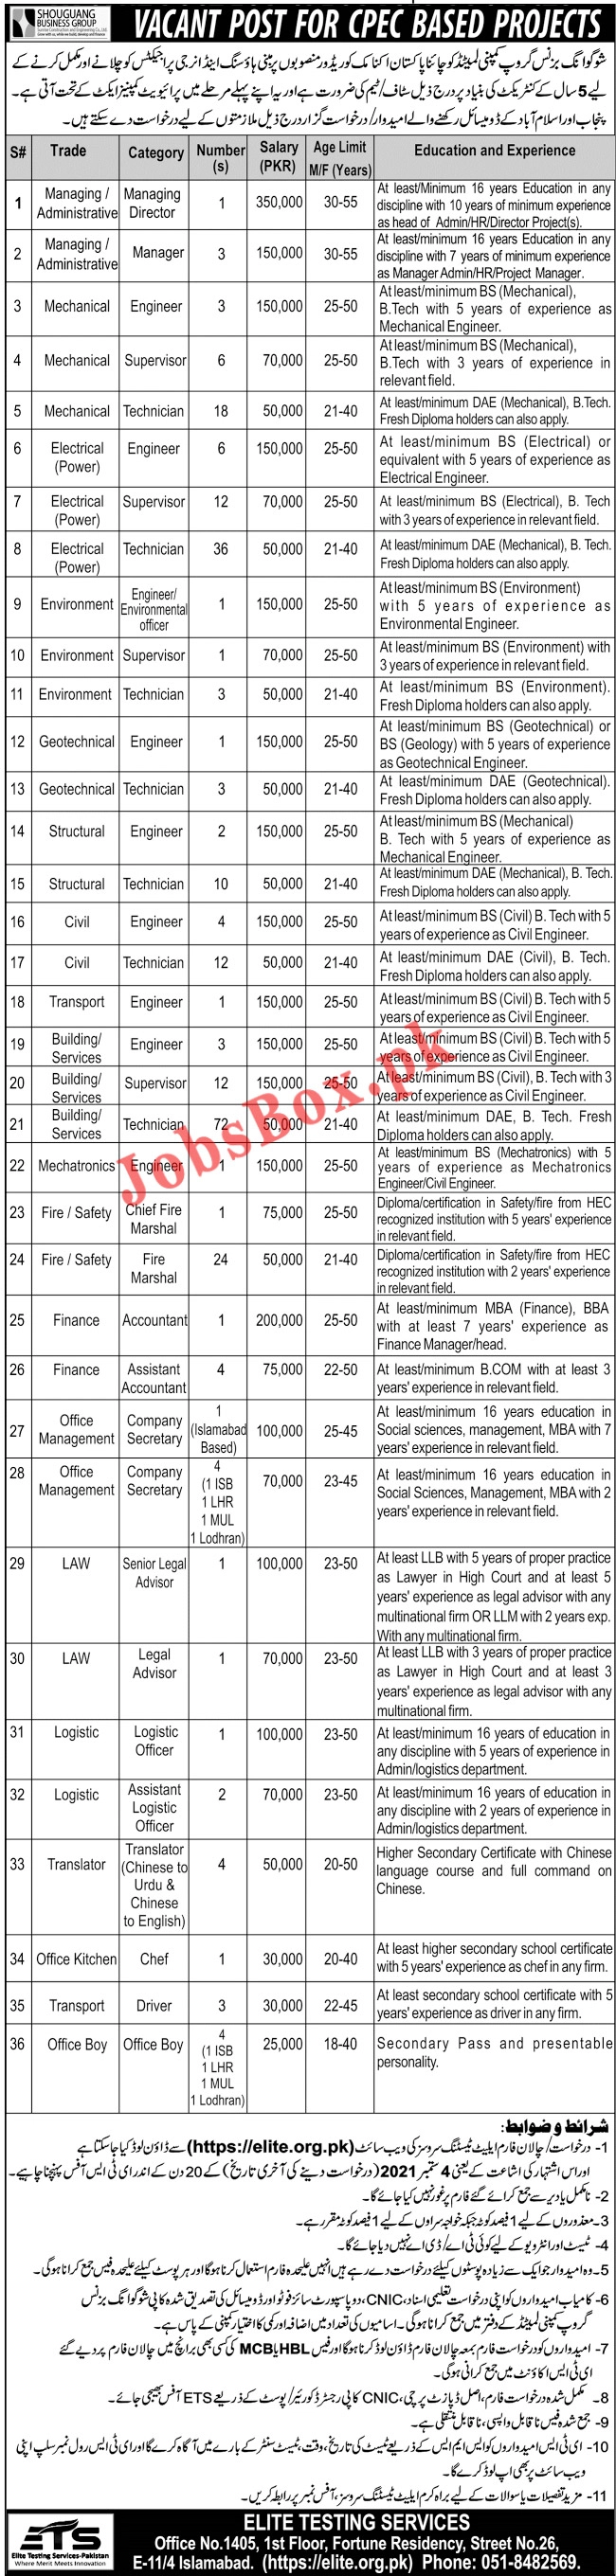 Shouguang Business Group Company Jobs 2021 - CPEC Project Jobs via ETS